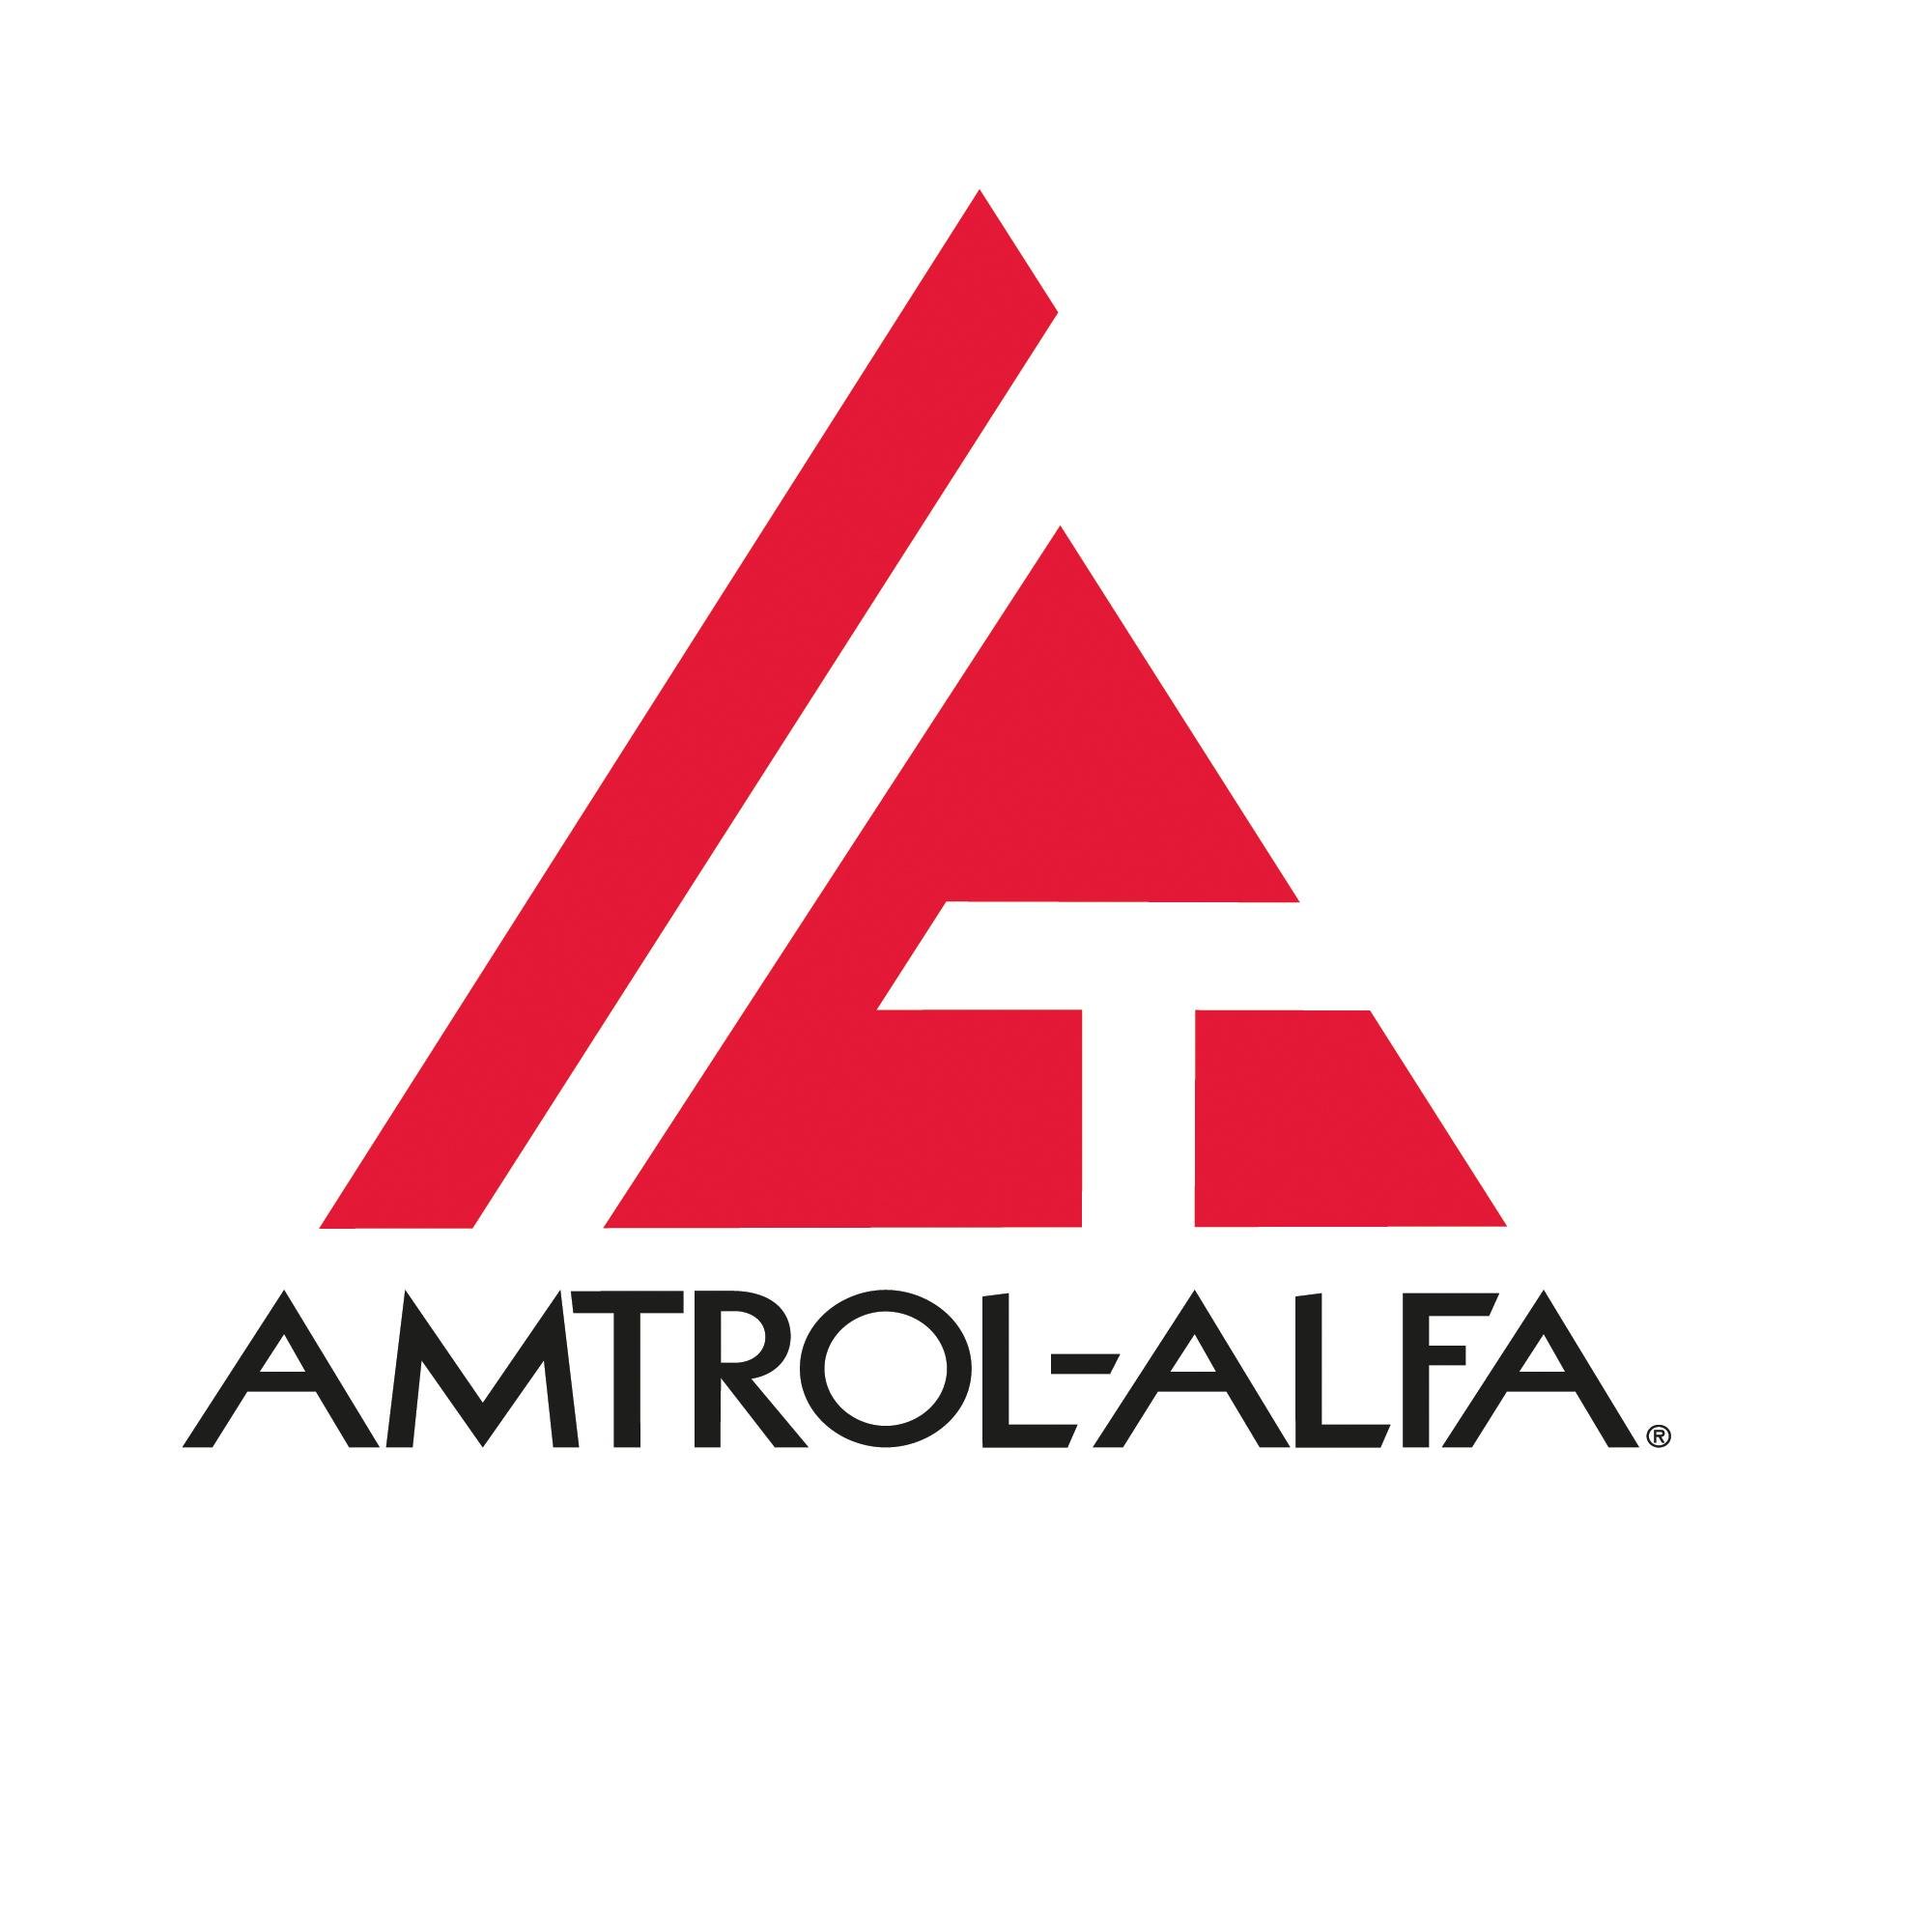 Amtrol-Alfa is the largest manufacturer of pressurized portable cylinders in Europe. Amtrol-Alfa is considered the #1 exporter in the world.